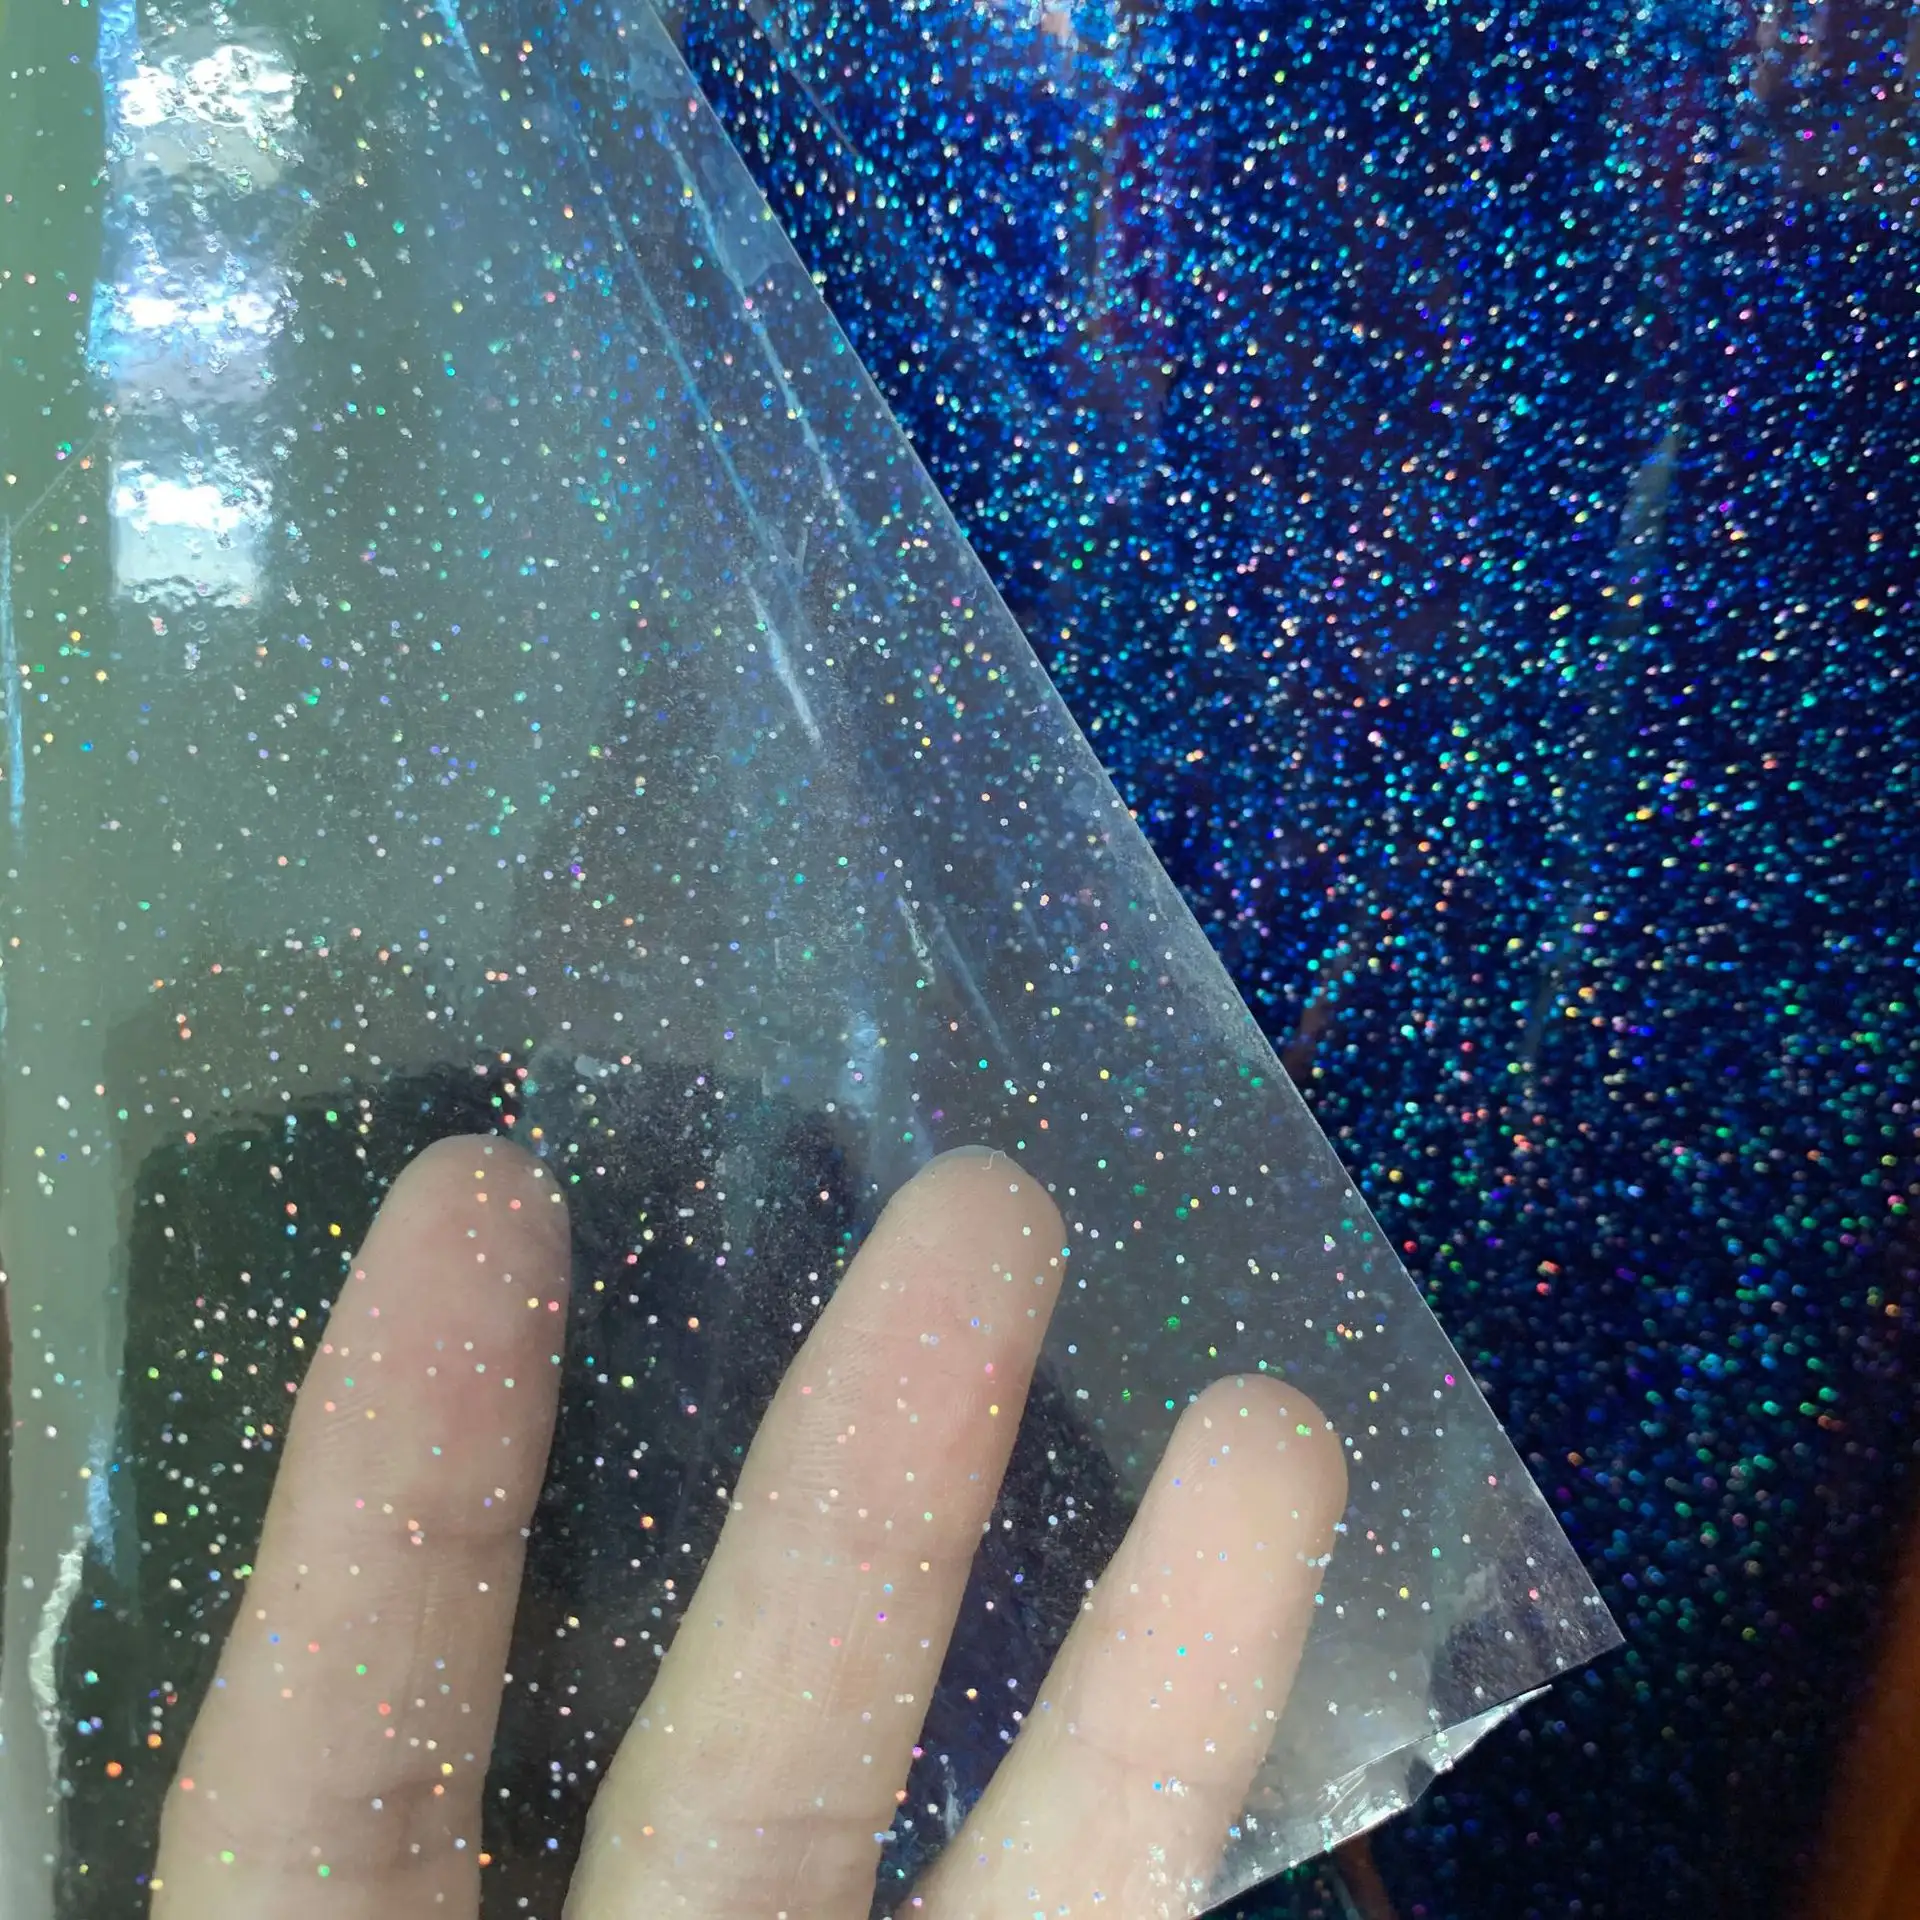 Wholesale Price Multi-purpose High Quality Gorgeous Colorful Glitter Soft Translucent Pvc Film for Stationery Blow Molding 40KG